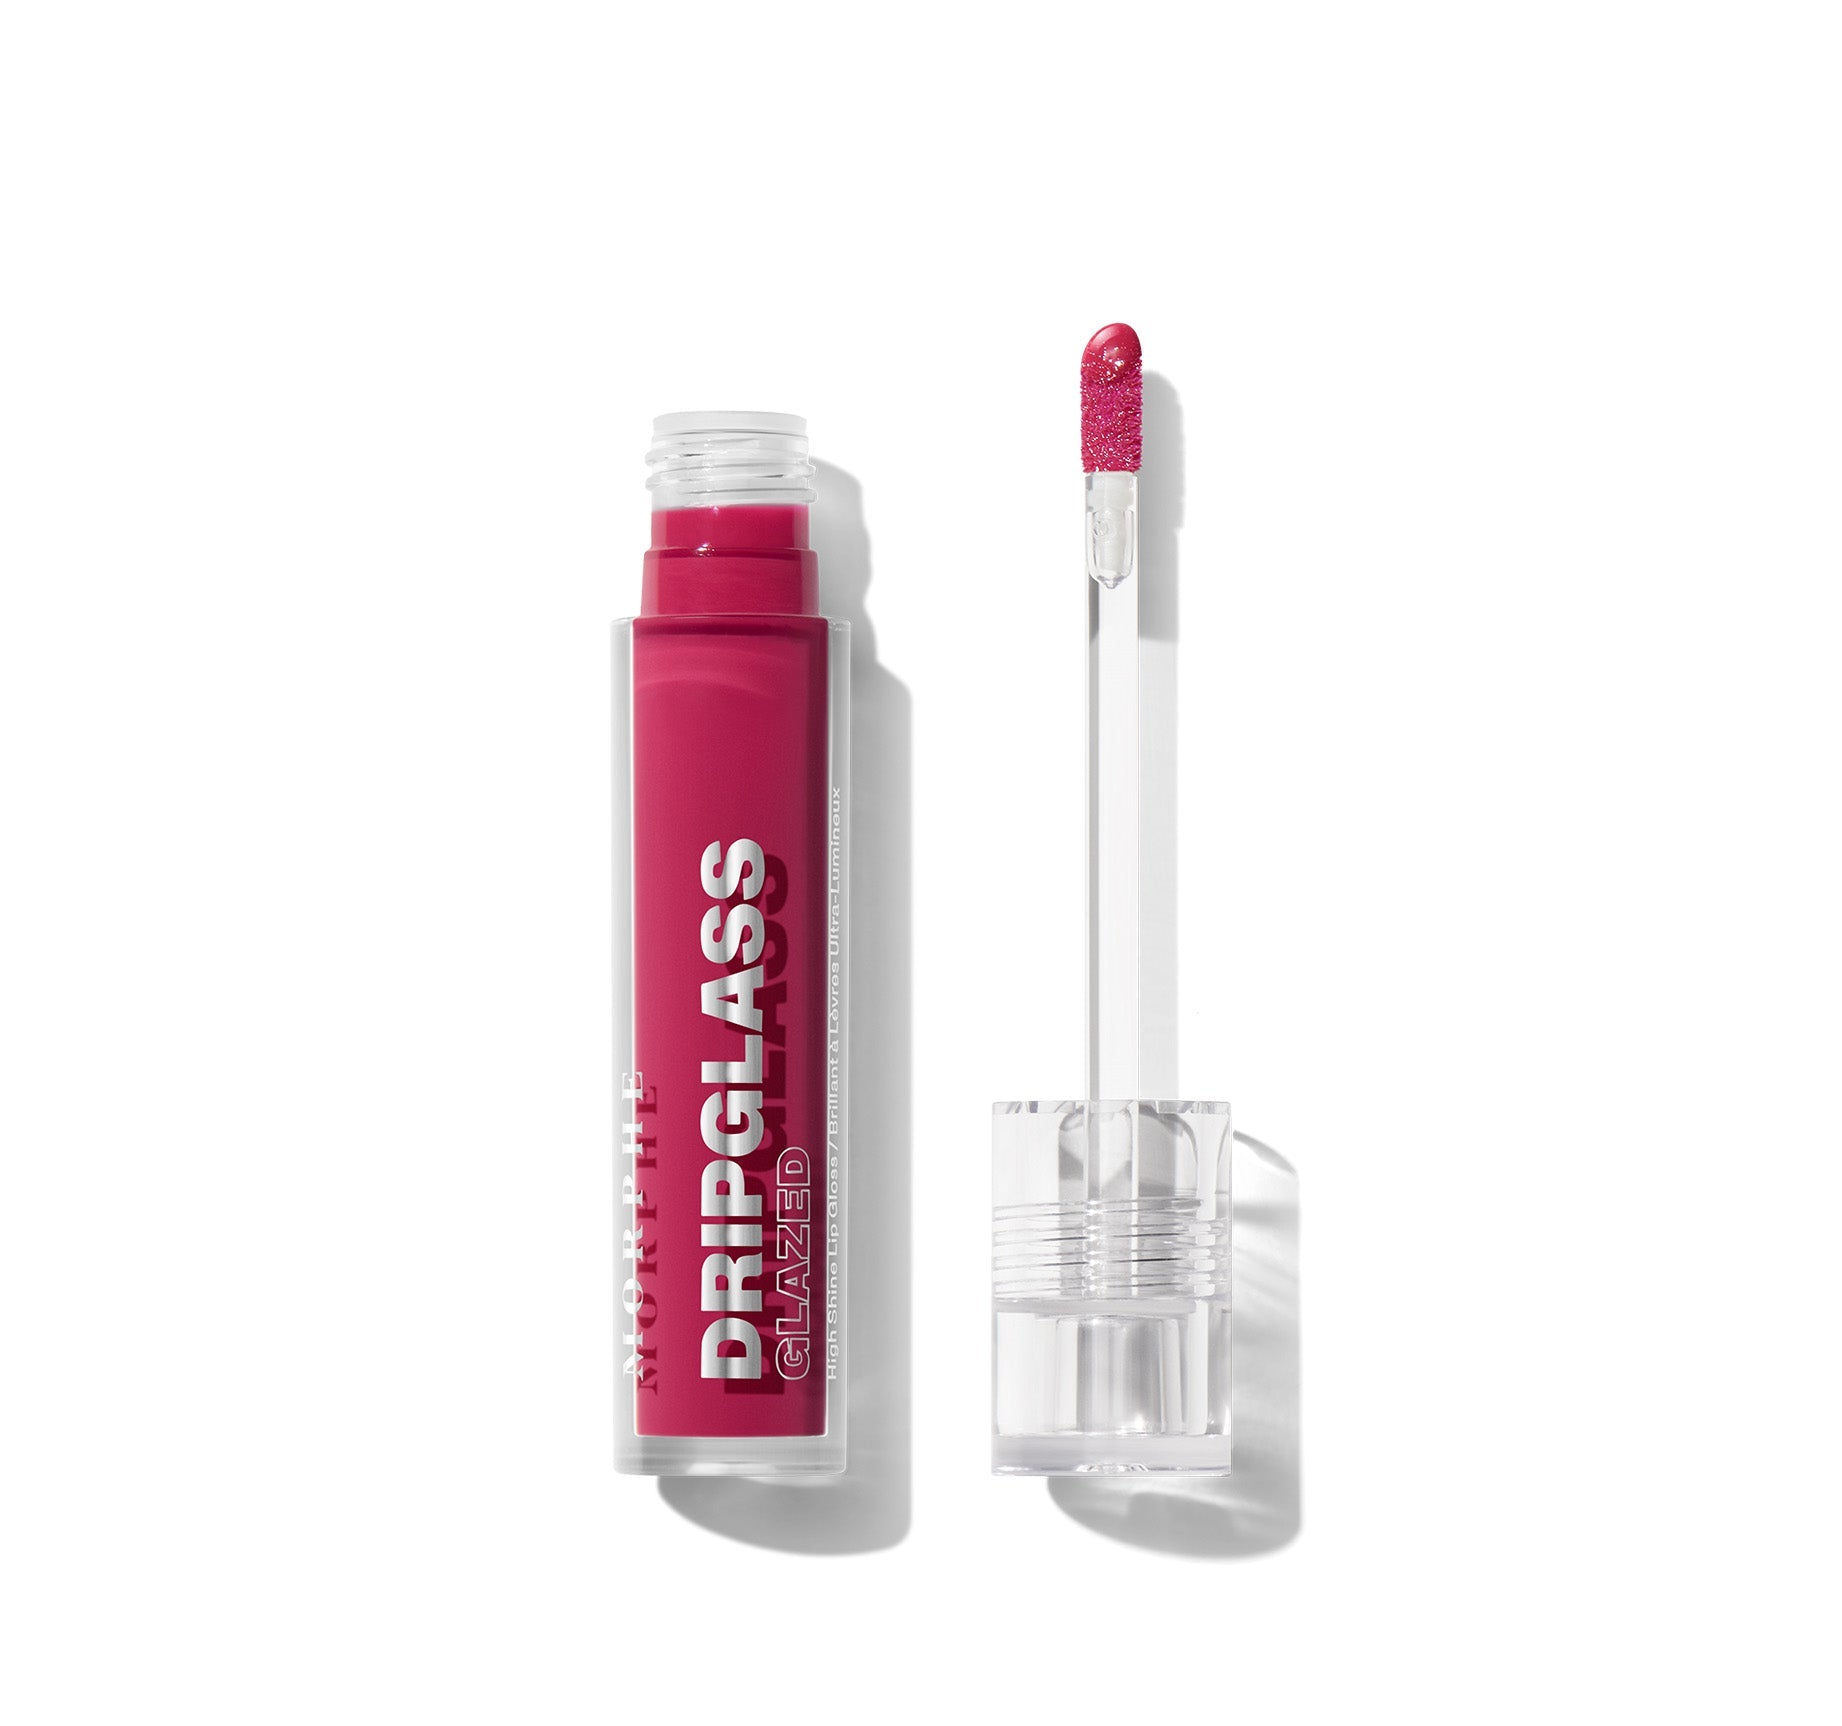 Dripglass Glazed High Shine Lip Gloss - Berry Stained - Image 1